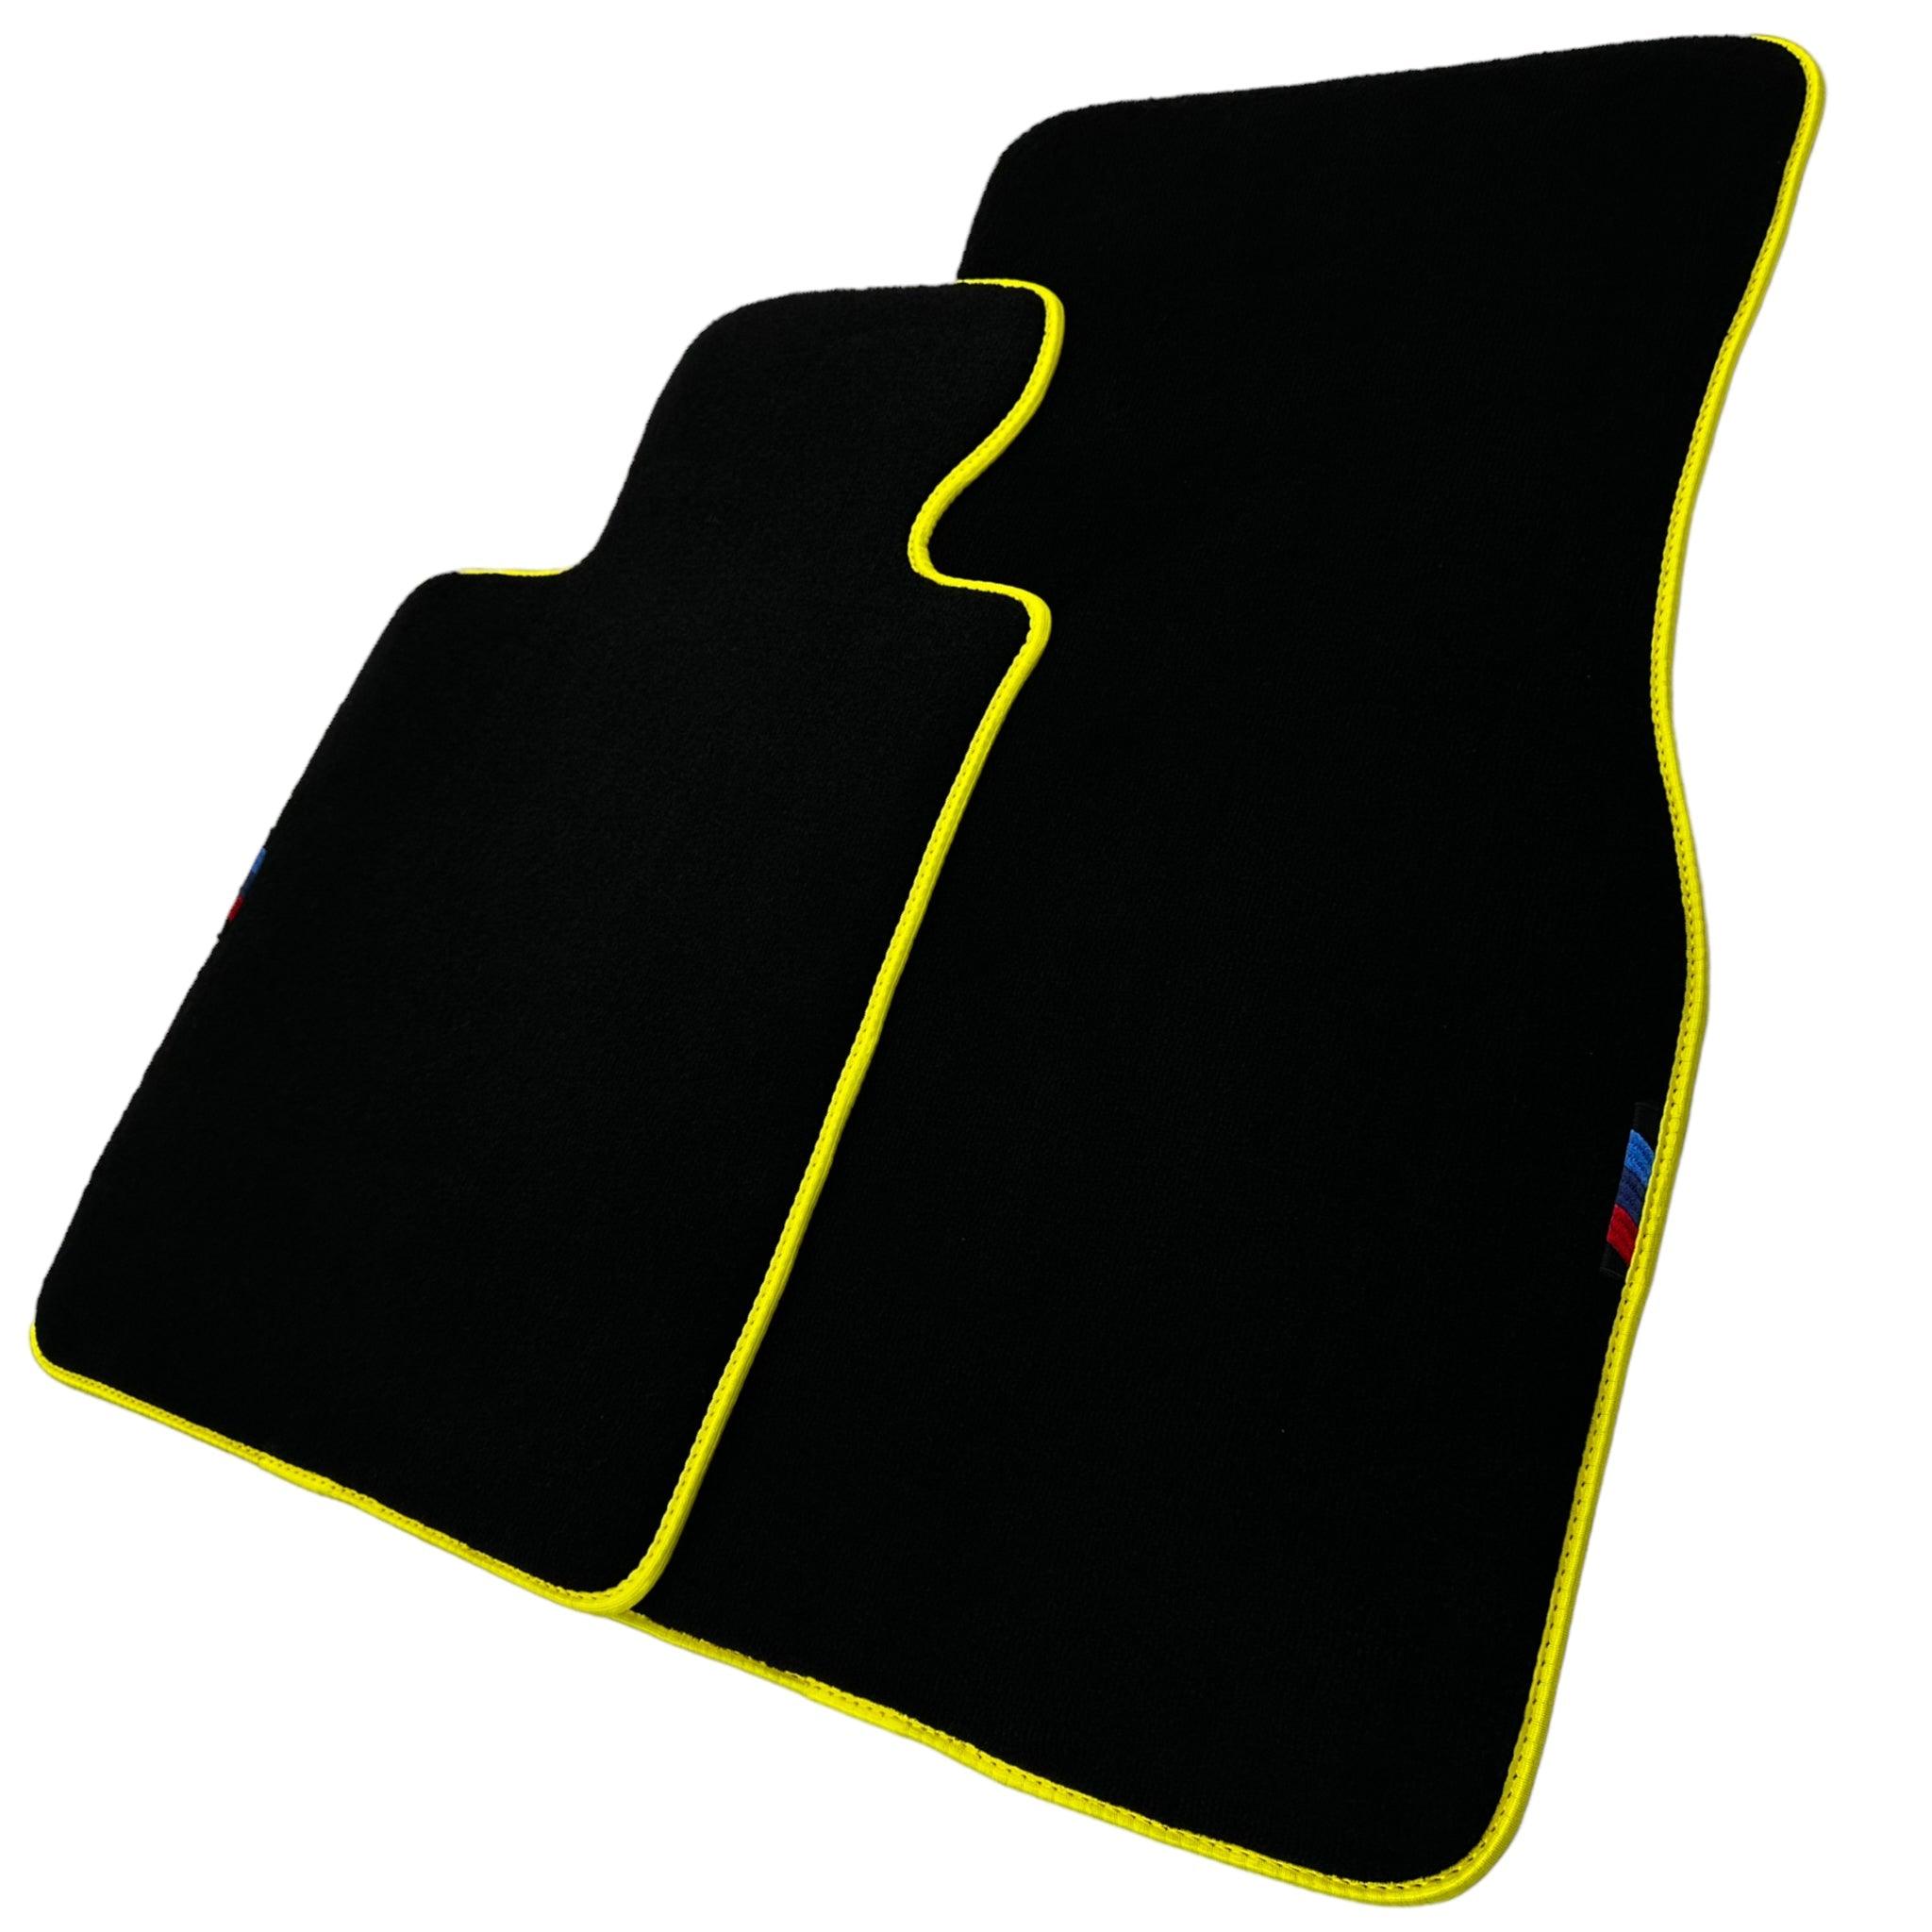 Black Floor Mats For BMW 3 Series E46 Convertible | Fighter Jet Edition | Yellow Trim